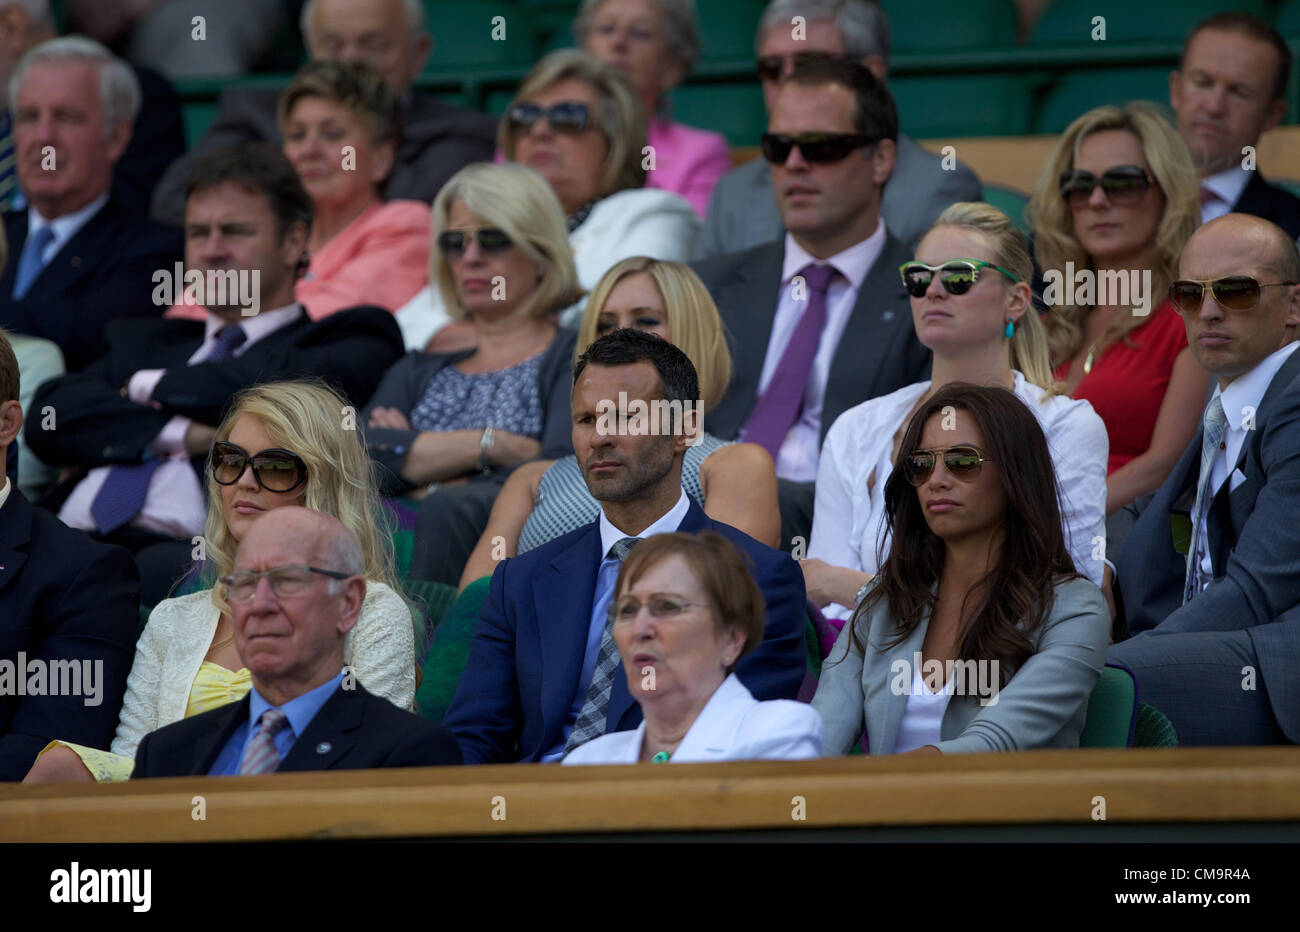 30.06.2012 The All England Lawn Tennis and Croquet Club. London, England. Giggs at Centre Court at The Championships Wimbledon, Lawn Tennis Club - London - Ryan Giggs and Sir Bobby Charlton in the royal box Stock Photo